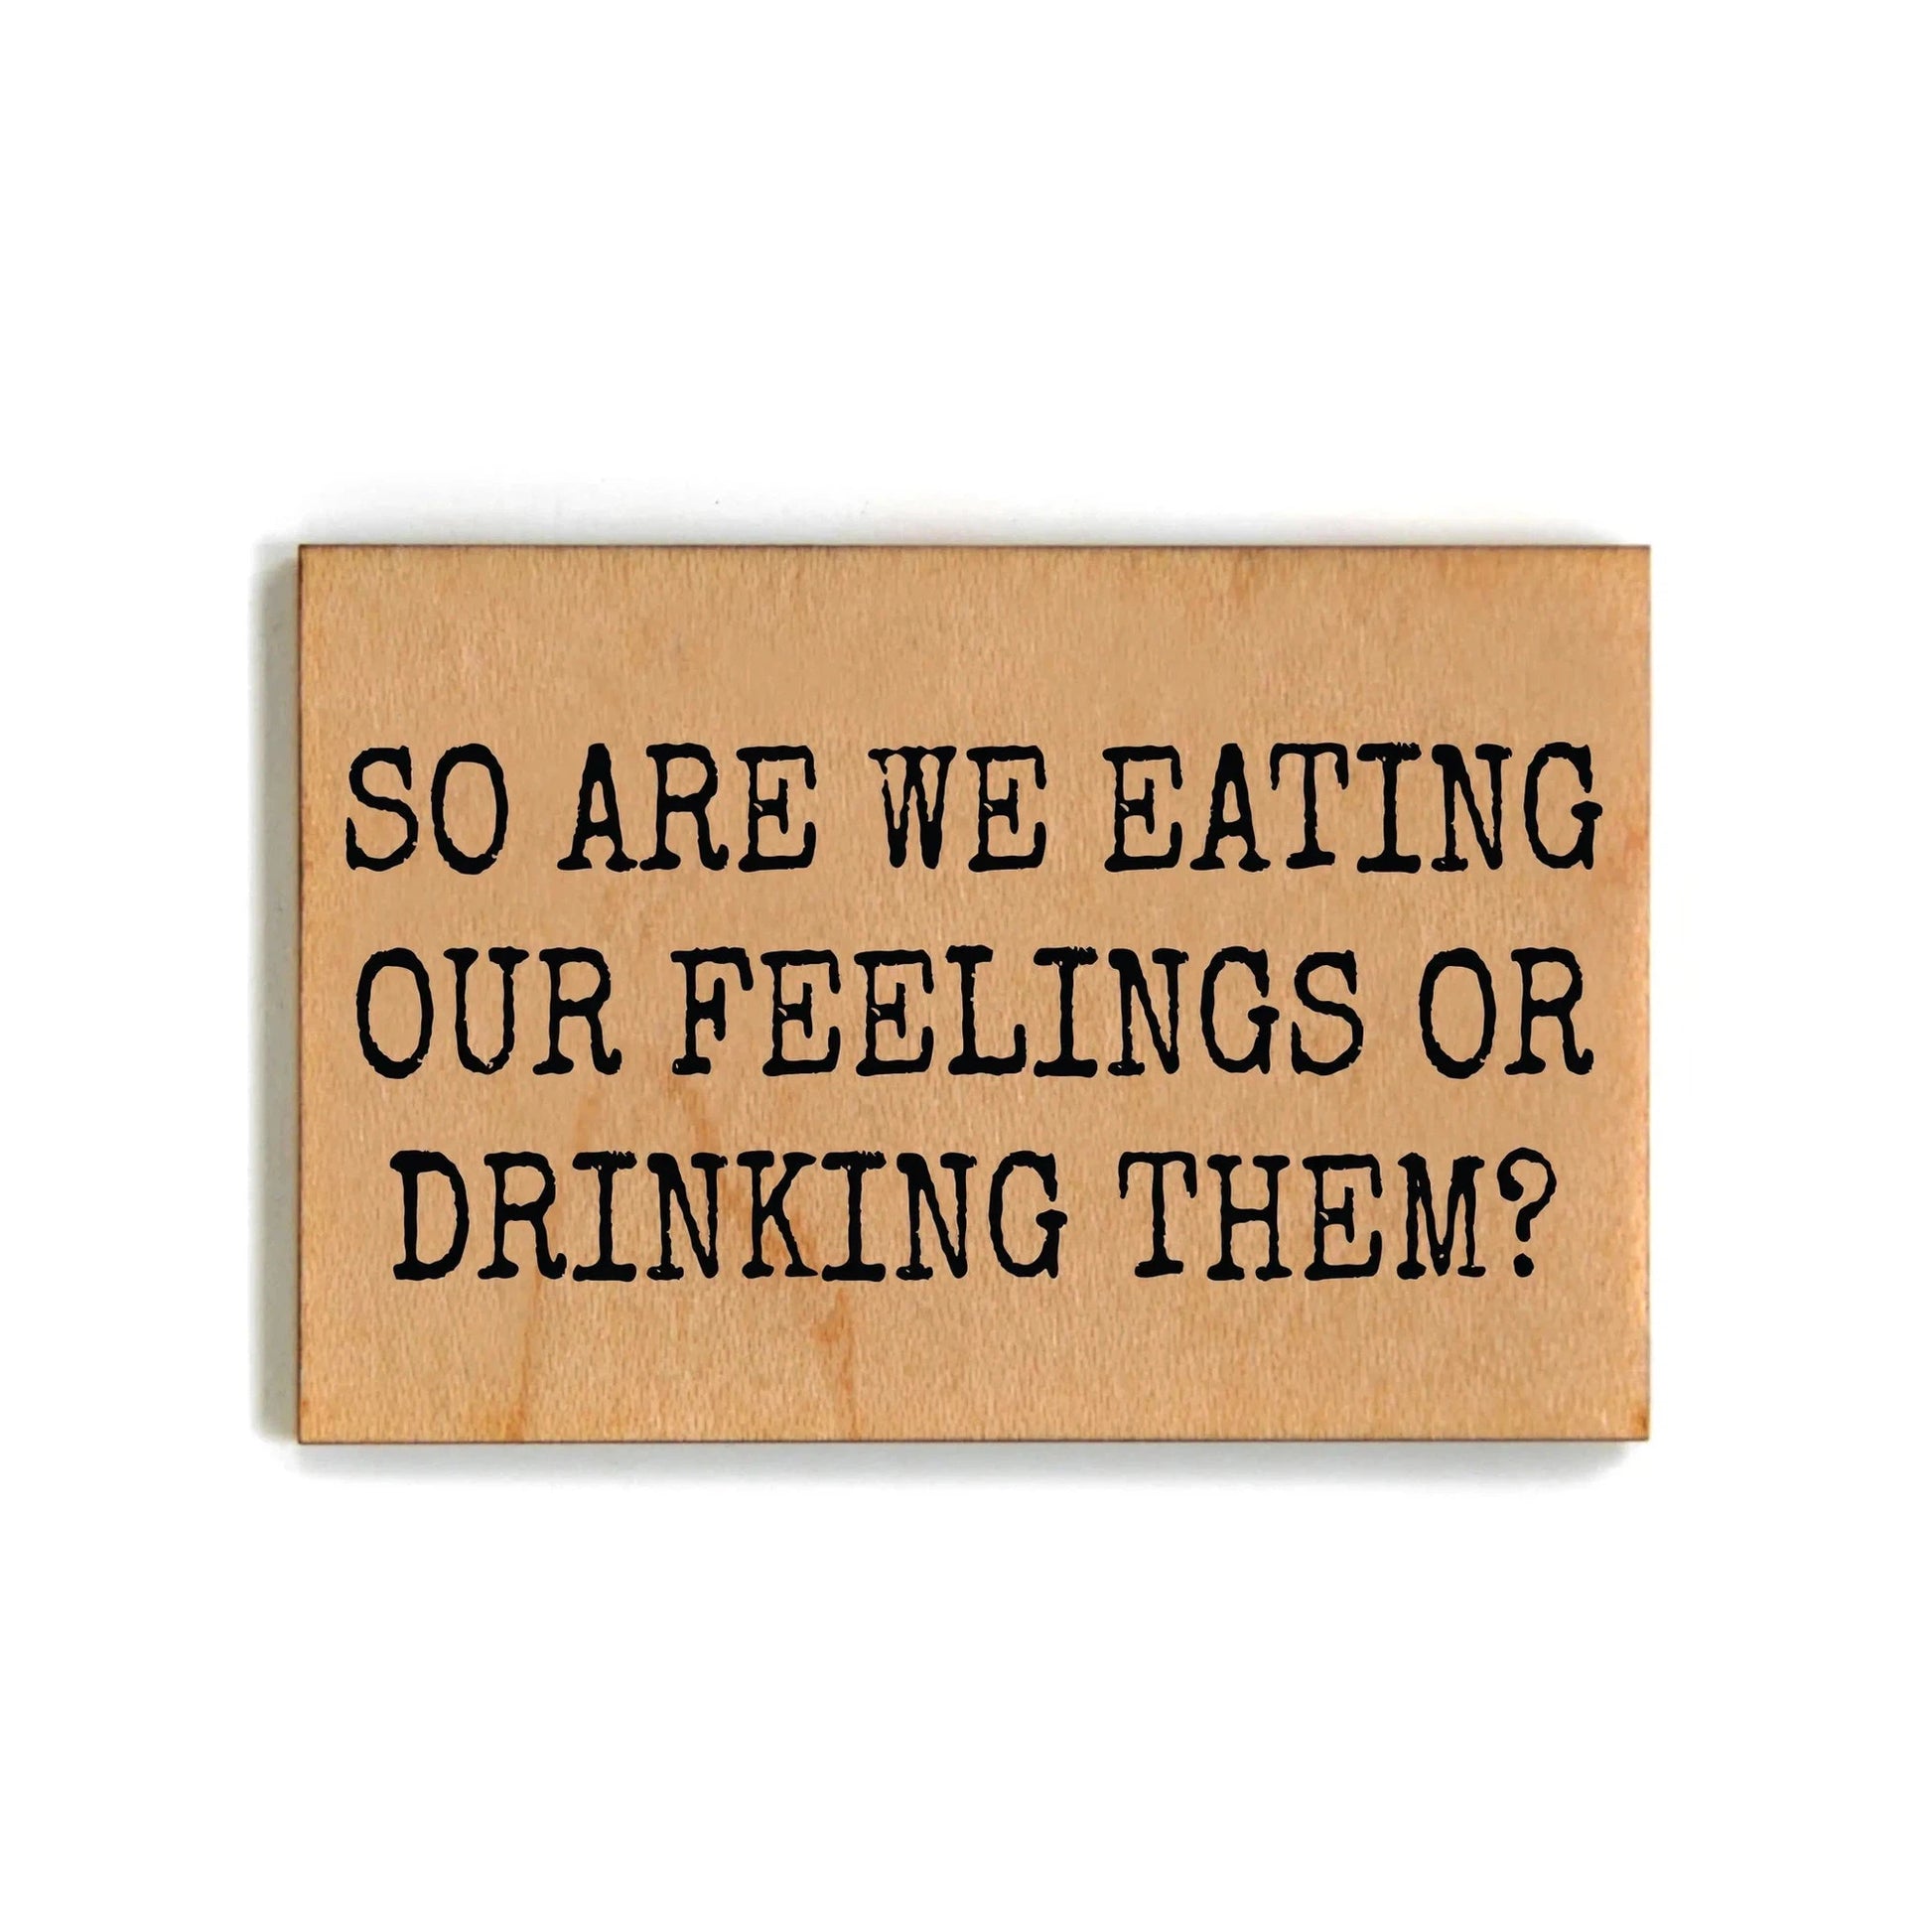 So Are We Eating Our Feelings Or Drinking Them Wood Magnet l 2" x 3"